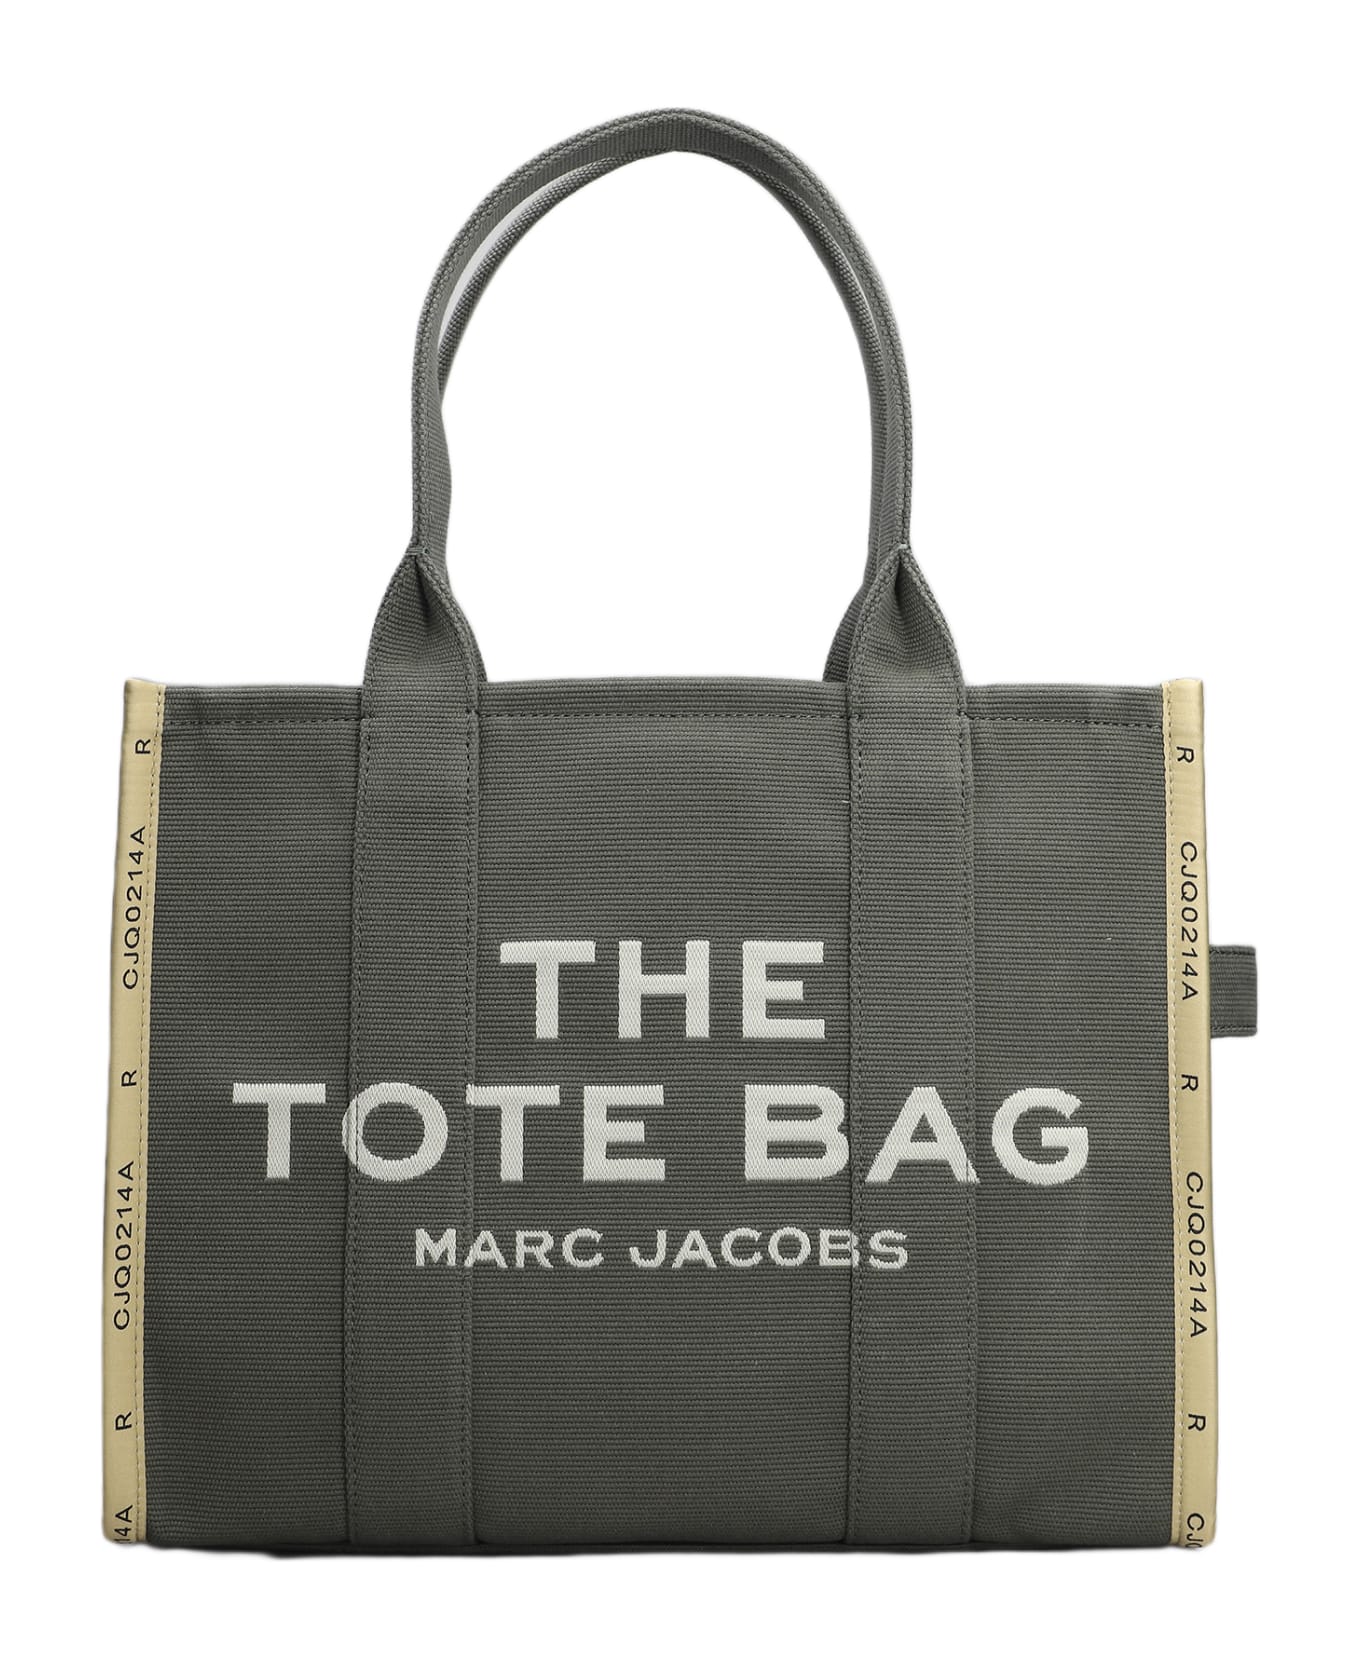 Marc Jacobs The Large Tote Bag - green トートバッグ